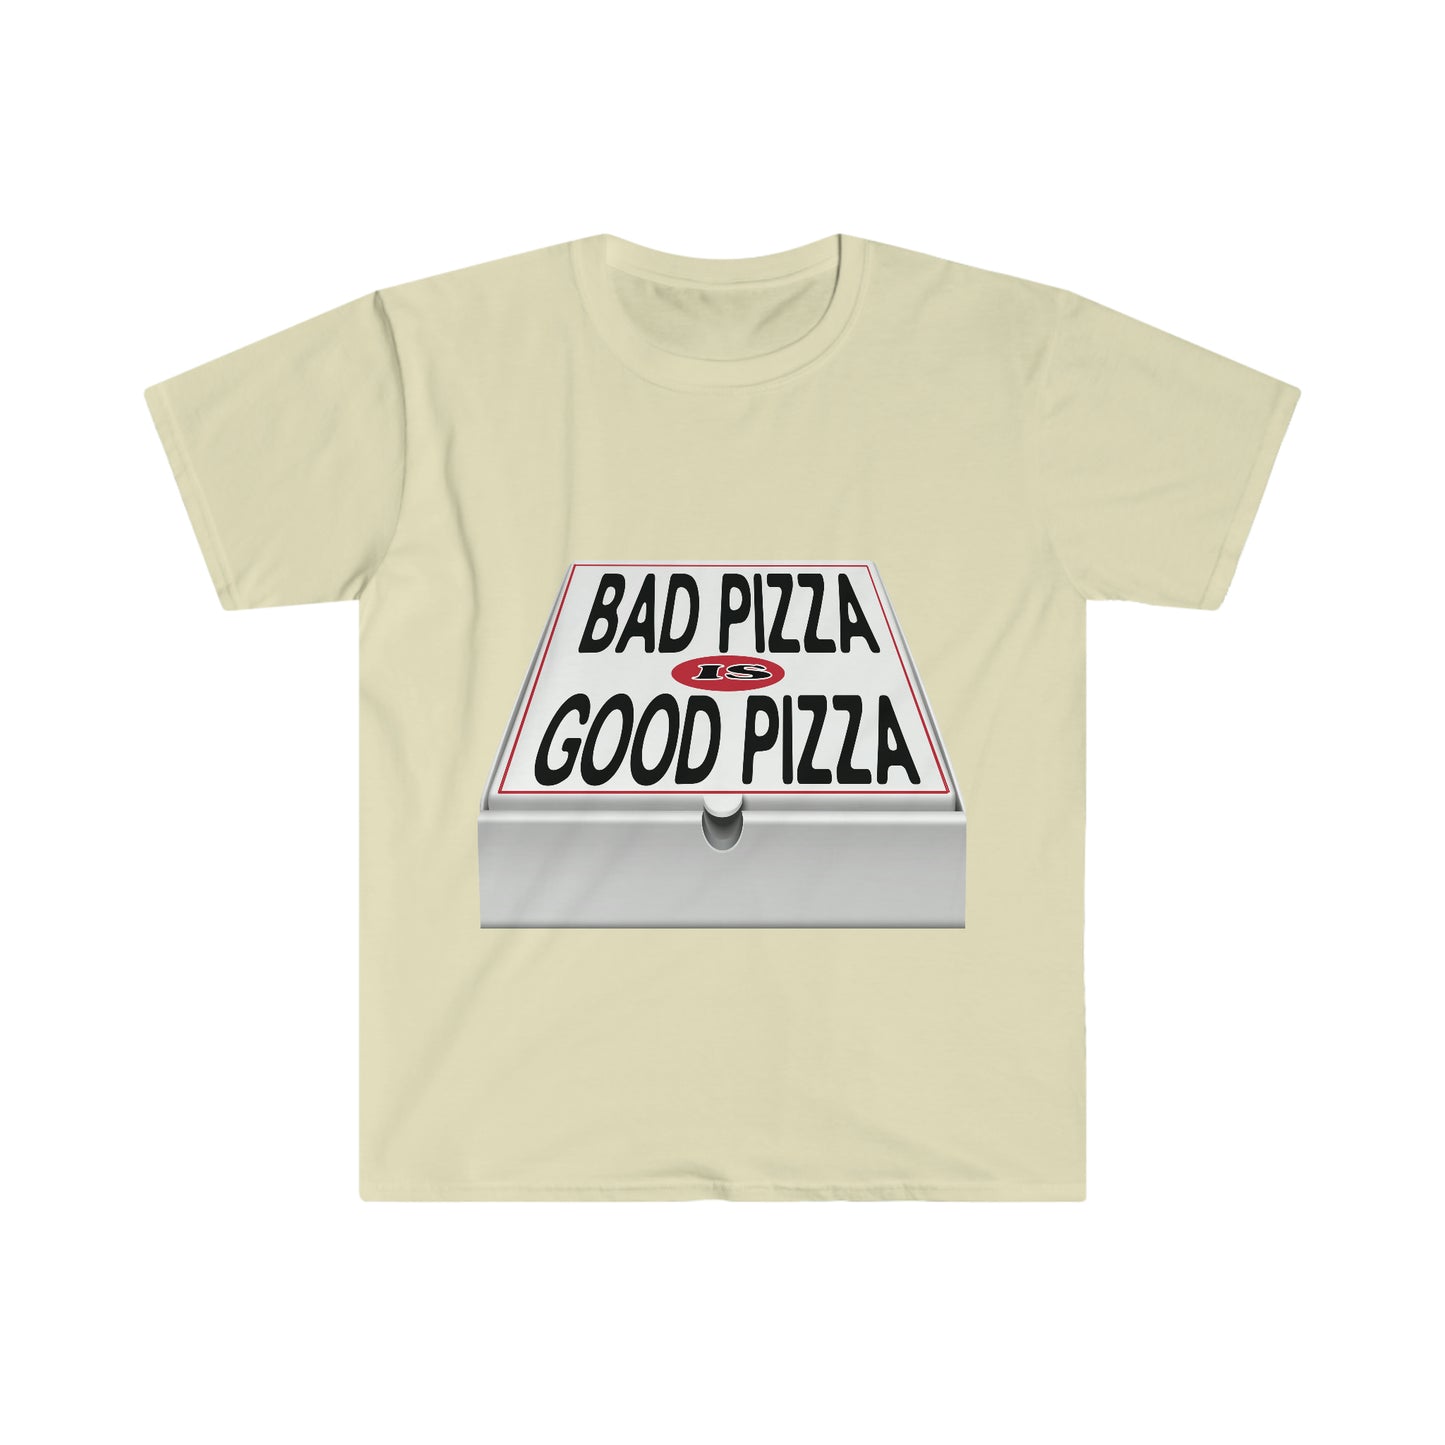 BAD PIZZA IS GOOD PIZZA